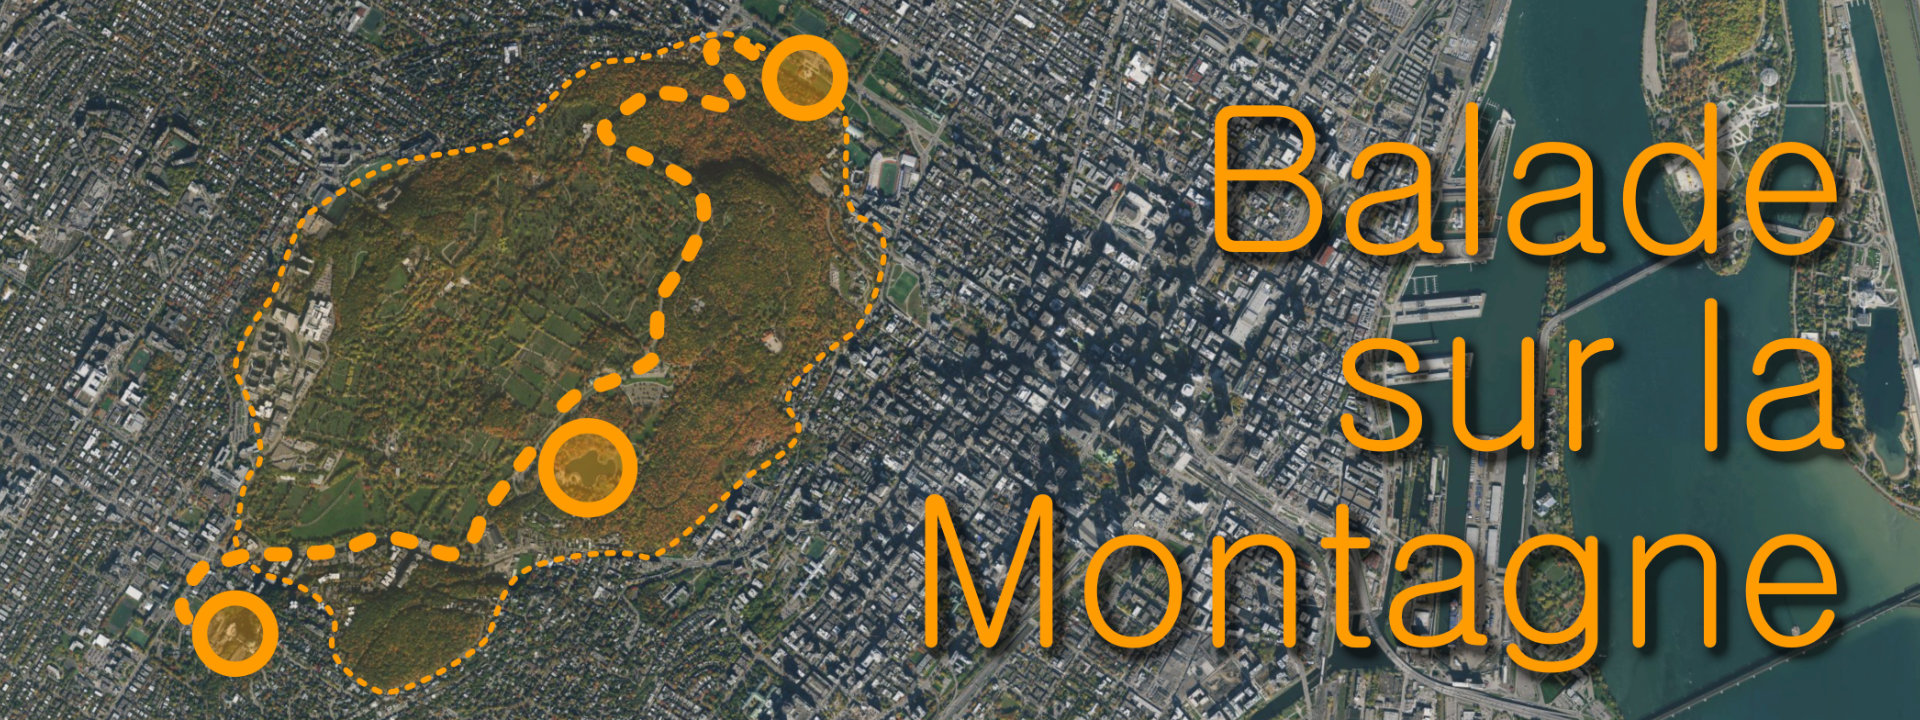 Satelite image of Montreal with Mont Royal park highlighted